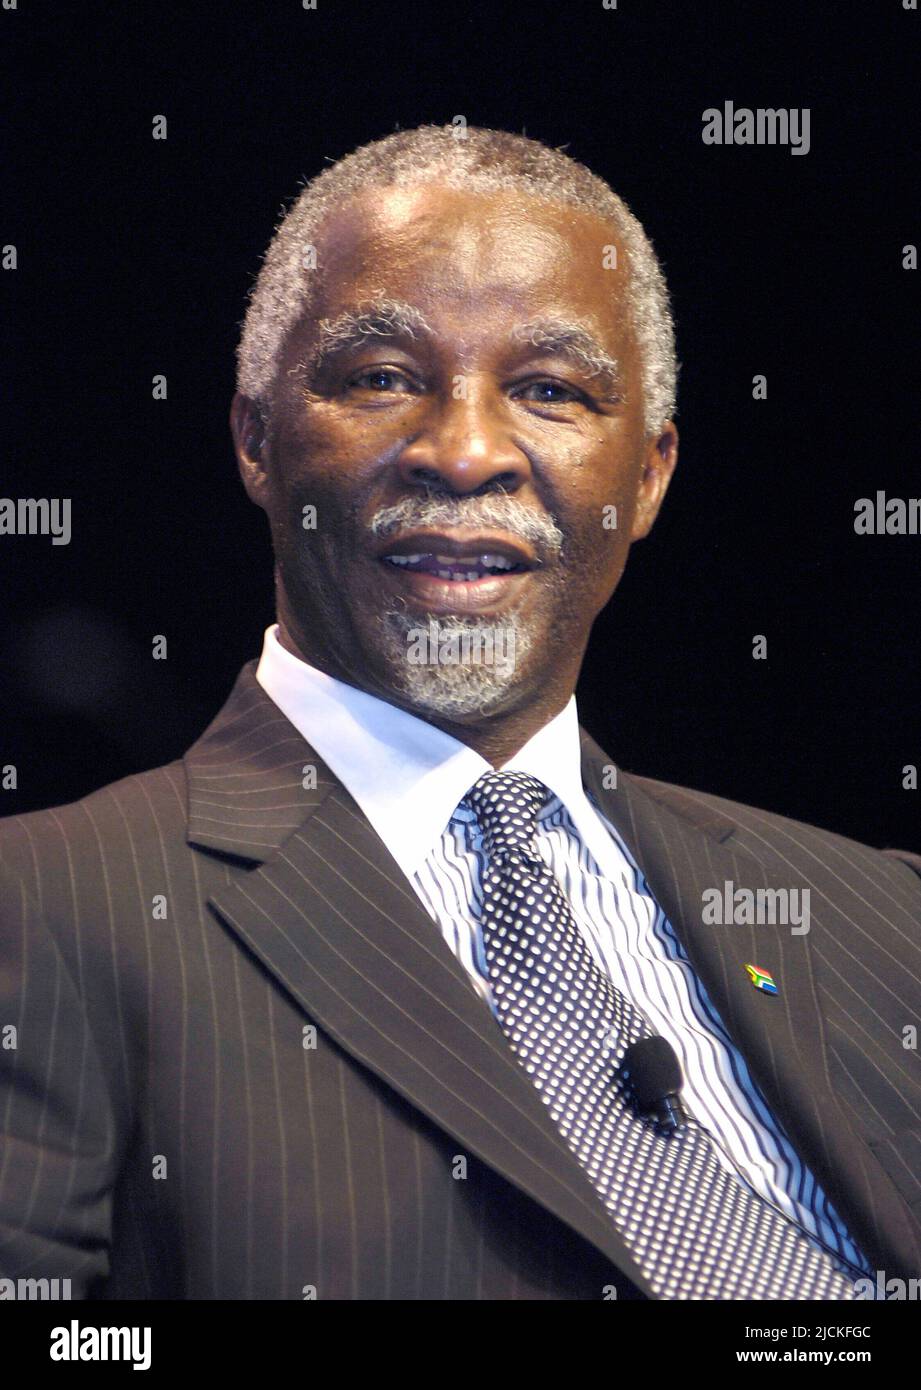 ARCHIVE PHOTO: Thabo MBEKI celebrates his 80th birthday on June 17th, 2022, Thabo MBEKI, RSA, President of South Africa, politician, portrait, portrait, presentation for the Soccer World Cup 2010 in South Africa/Africa on July 7th, 2006 in the Tempodrom in Berlin; Soccer World Cup 2006 FIFA World Cup 2006, from 09.06. - 09.07.2006 in Germany Stock Photo